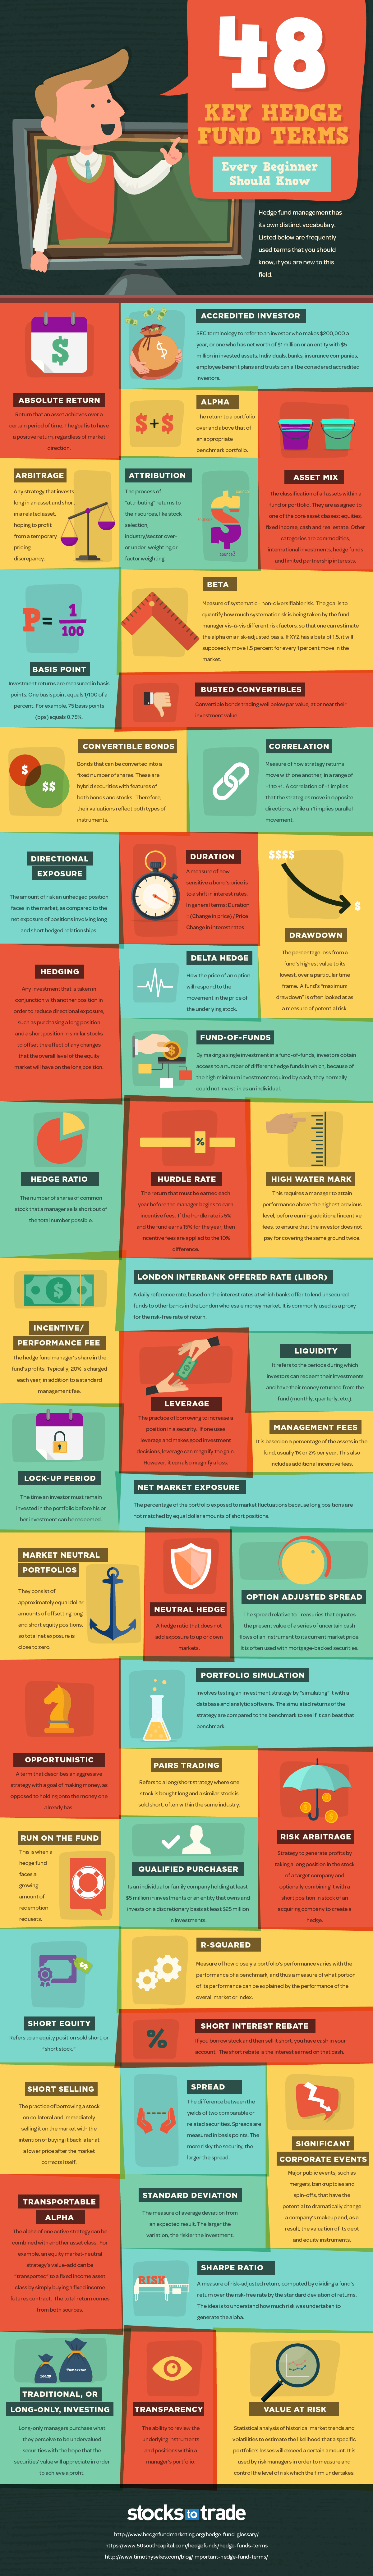 48 Key Hedge Fund Terms Every Beginner Should Know {INFOGRAPHIC}